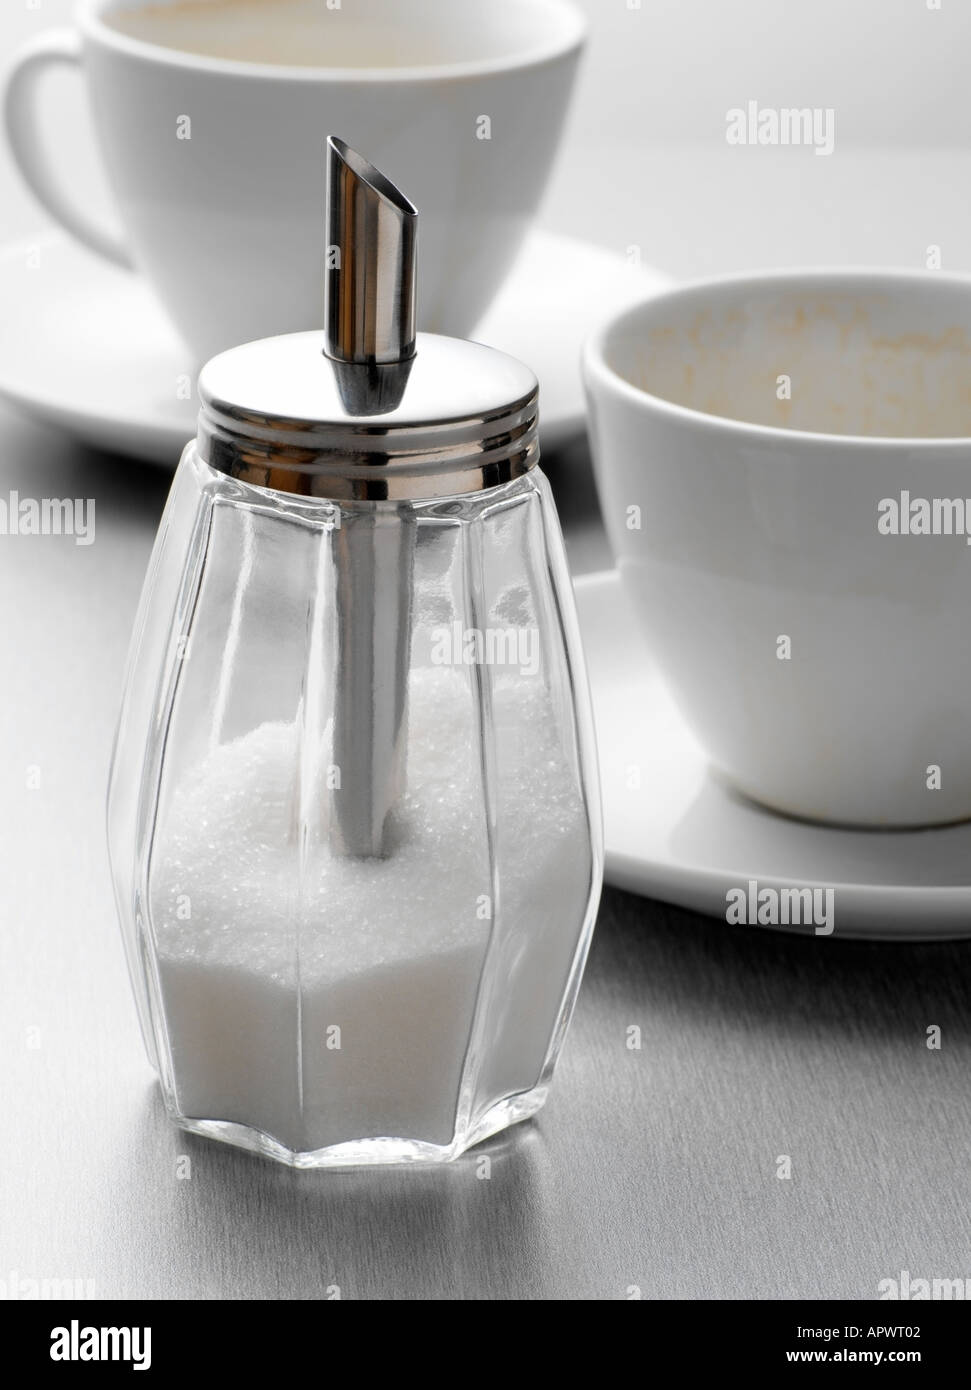 Sugar shaker and cups Stock Photo